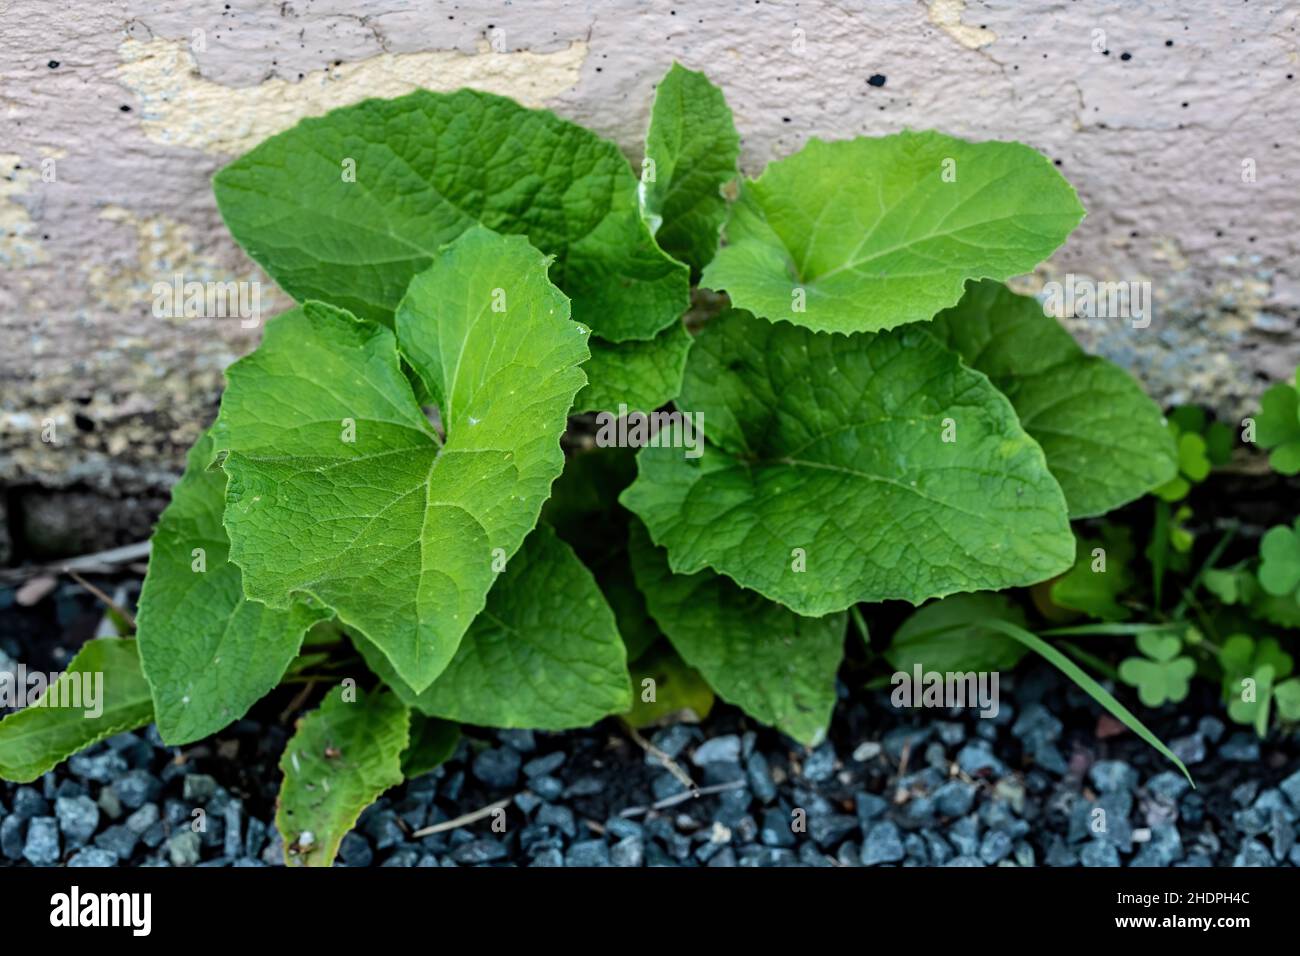 Burdock, a biennial plant whose root is used for medicinal purposes. Stock Photo